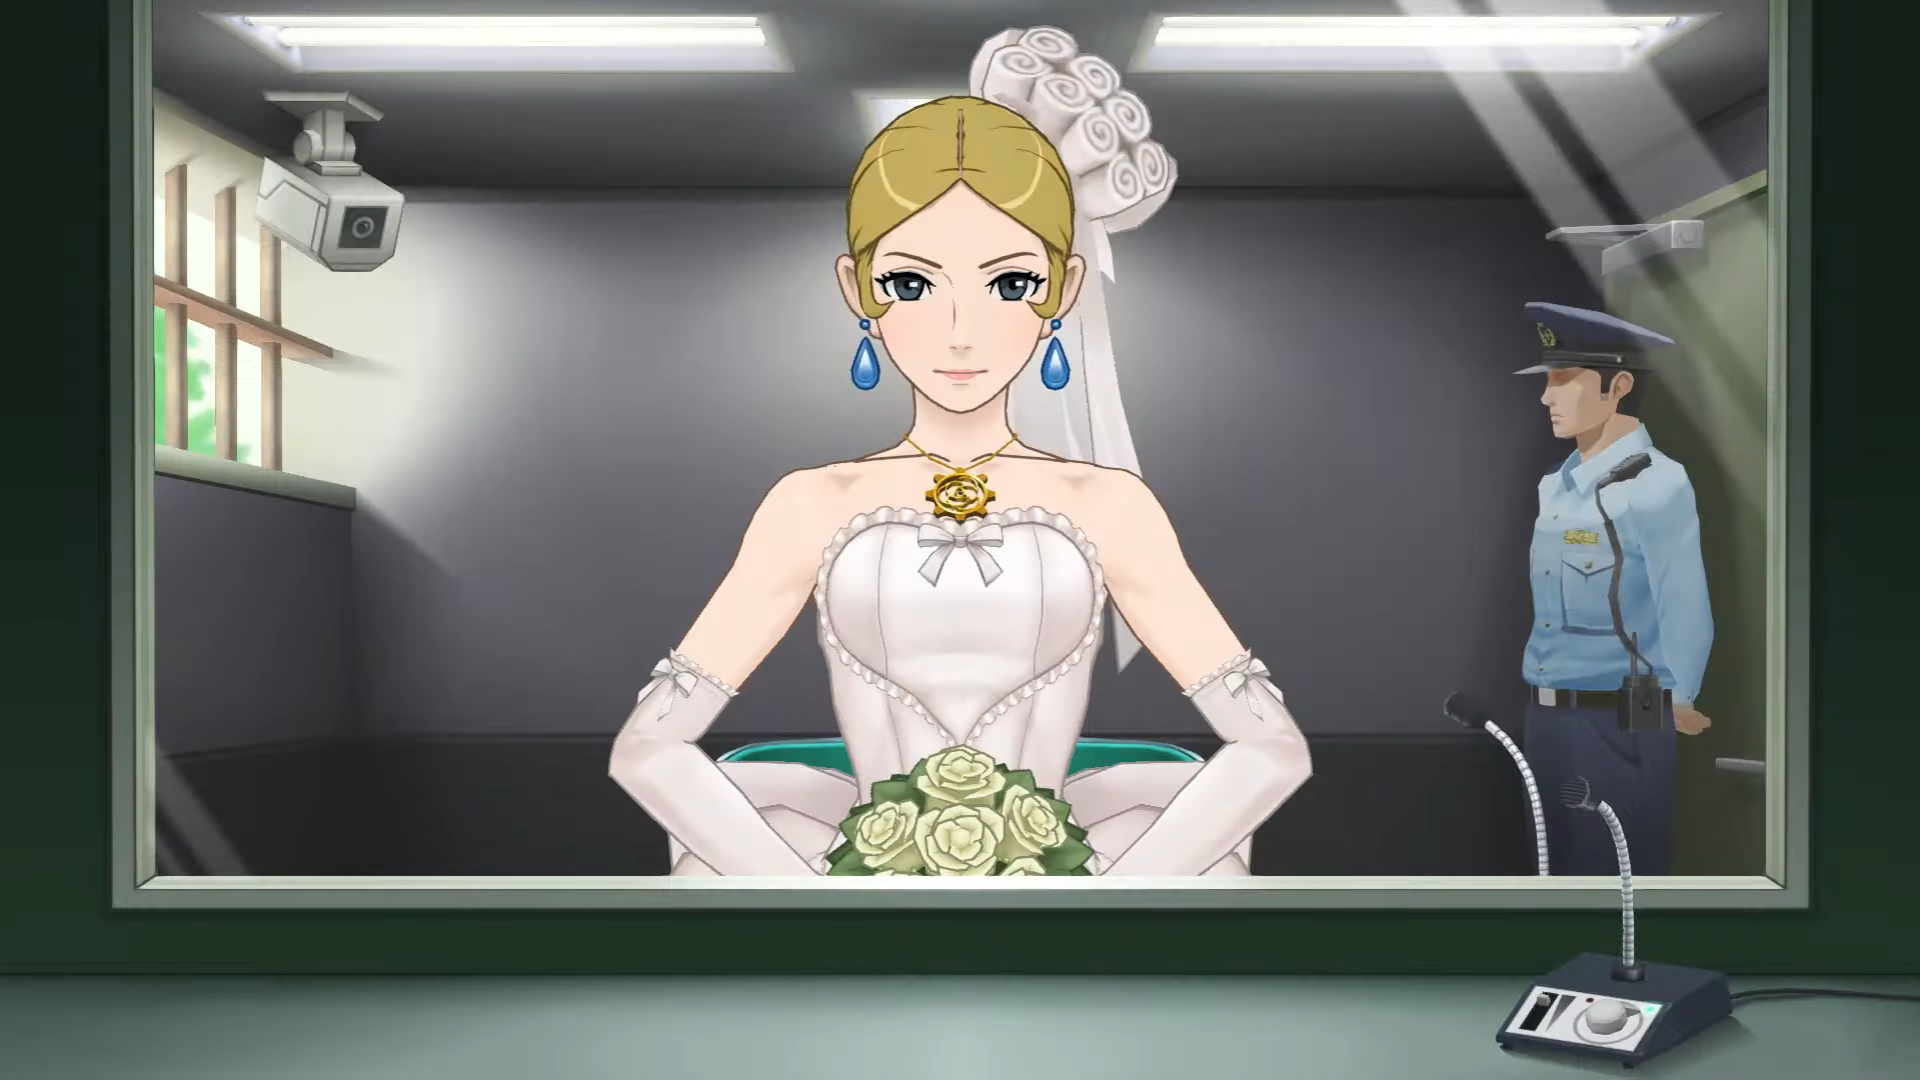 Apollo Justice: Ace Attorney Trilogy English Trailer Introduces Spirit of Justice Post-Game Case, “Turnabout Time Traveler”